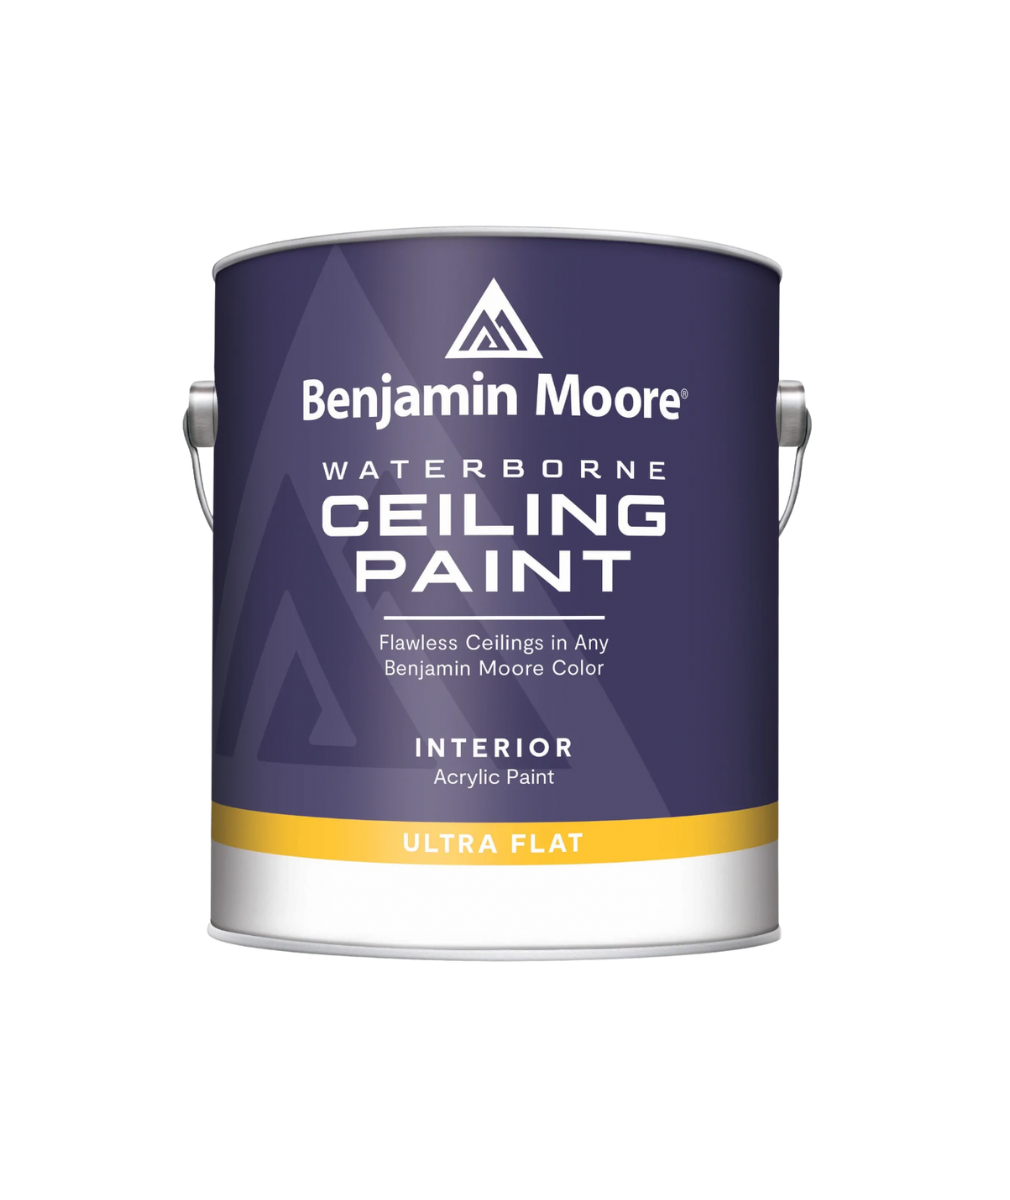 Benjamin Moore Waterborne Ceiling Paint in a Quart finish at Southwestern Paint Houston, TX.